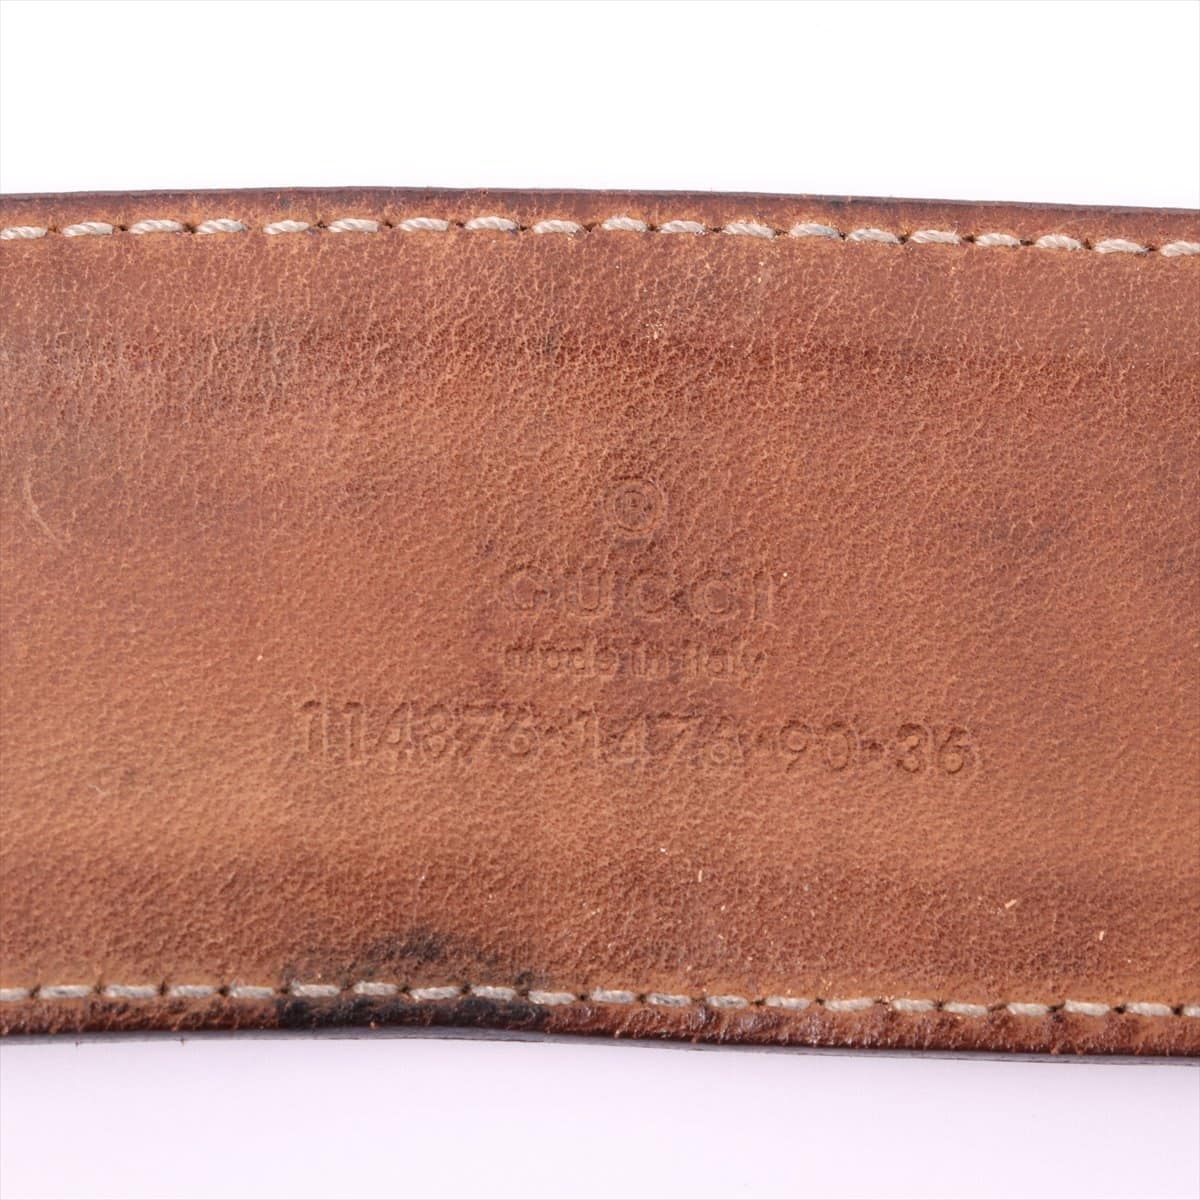 Gucci 114876 Interlocking G Belt 90/36 Canvas & leather Brown Large dirt on the back side There is a scratch on the metal fittings